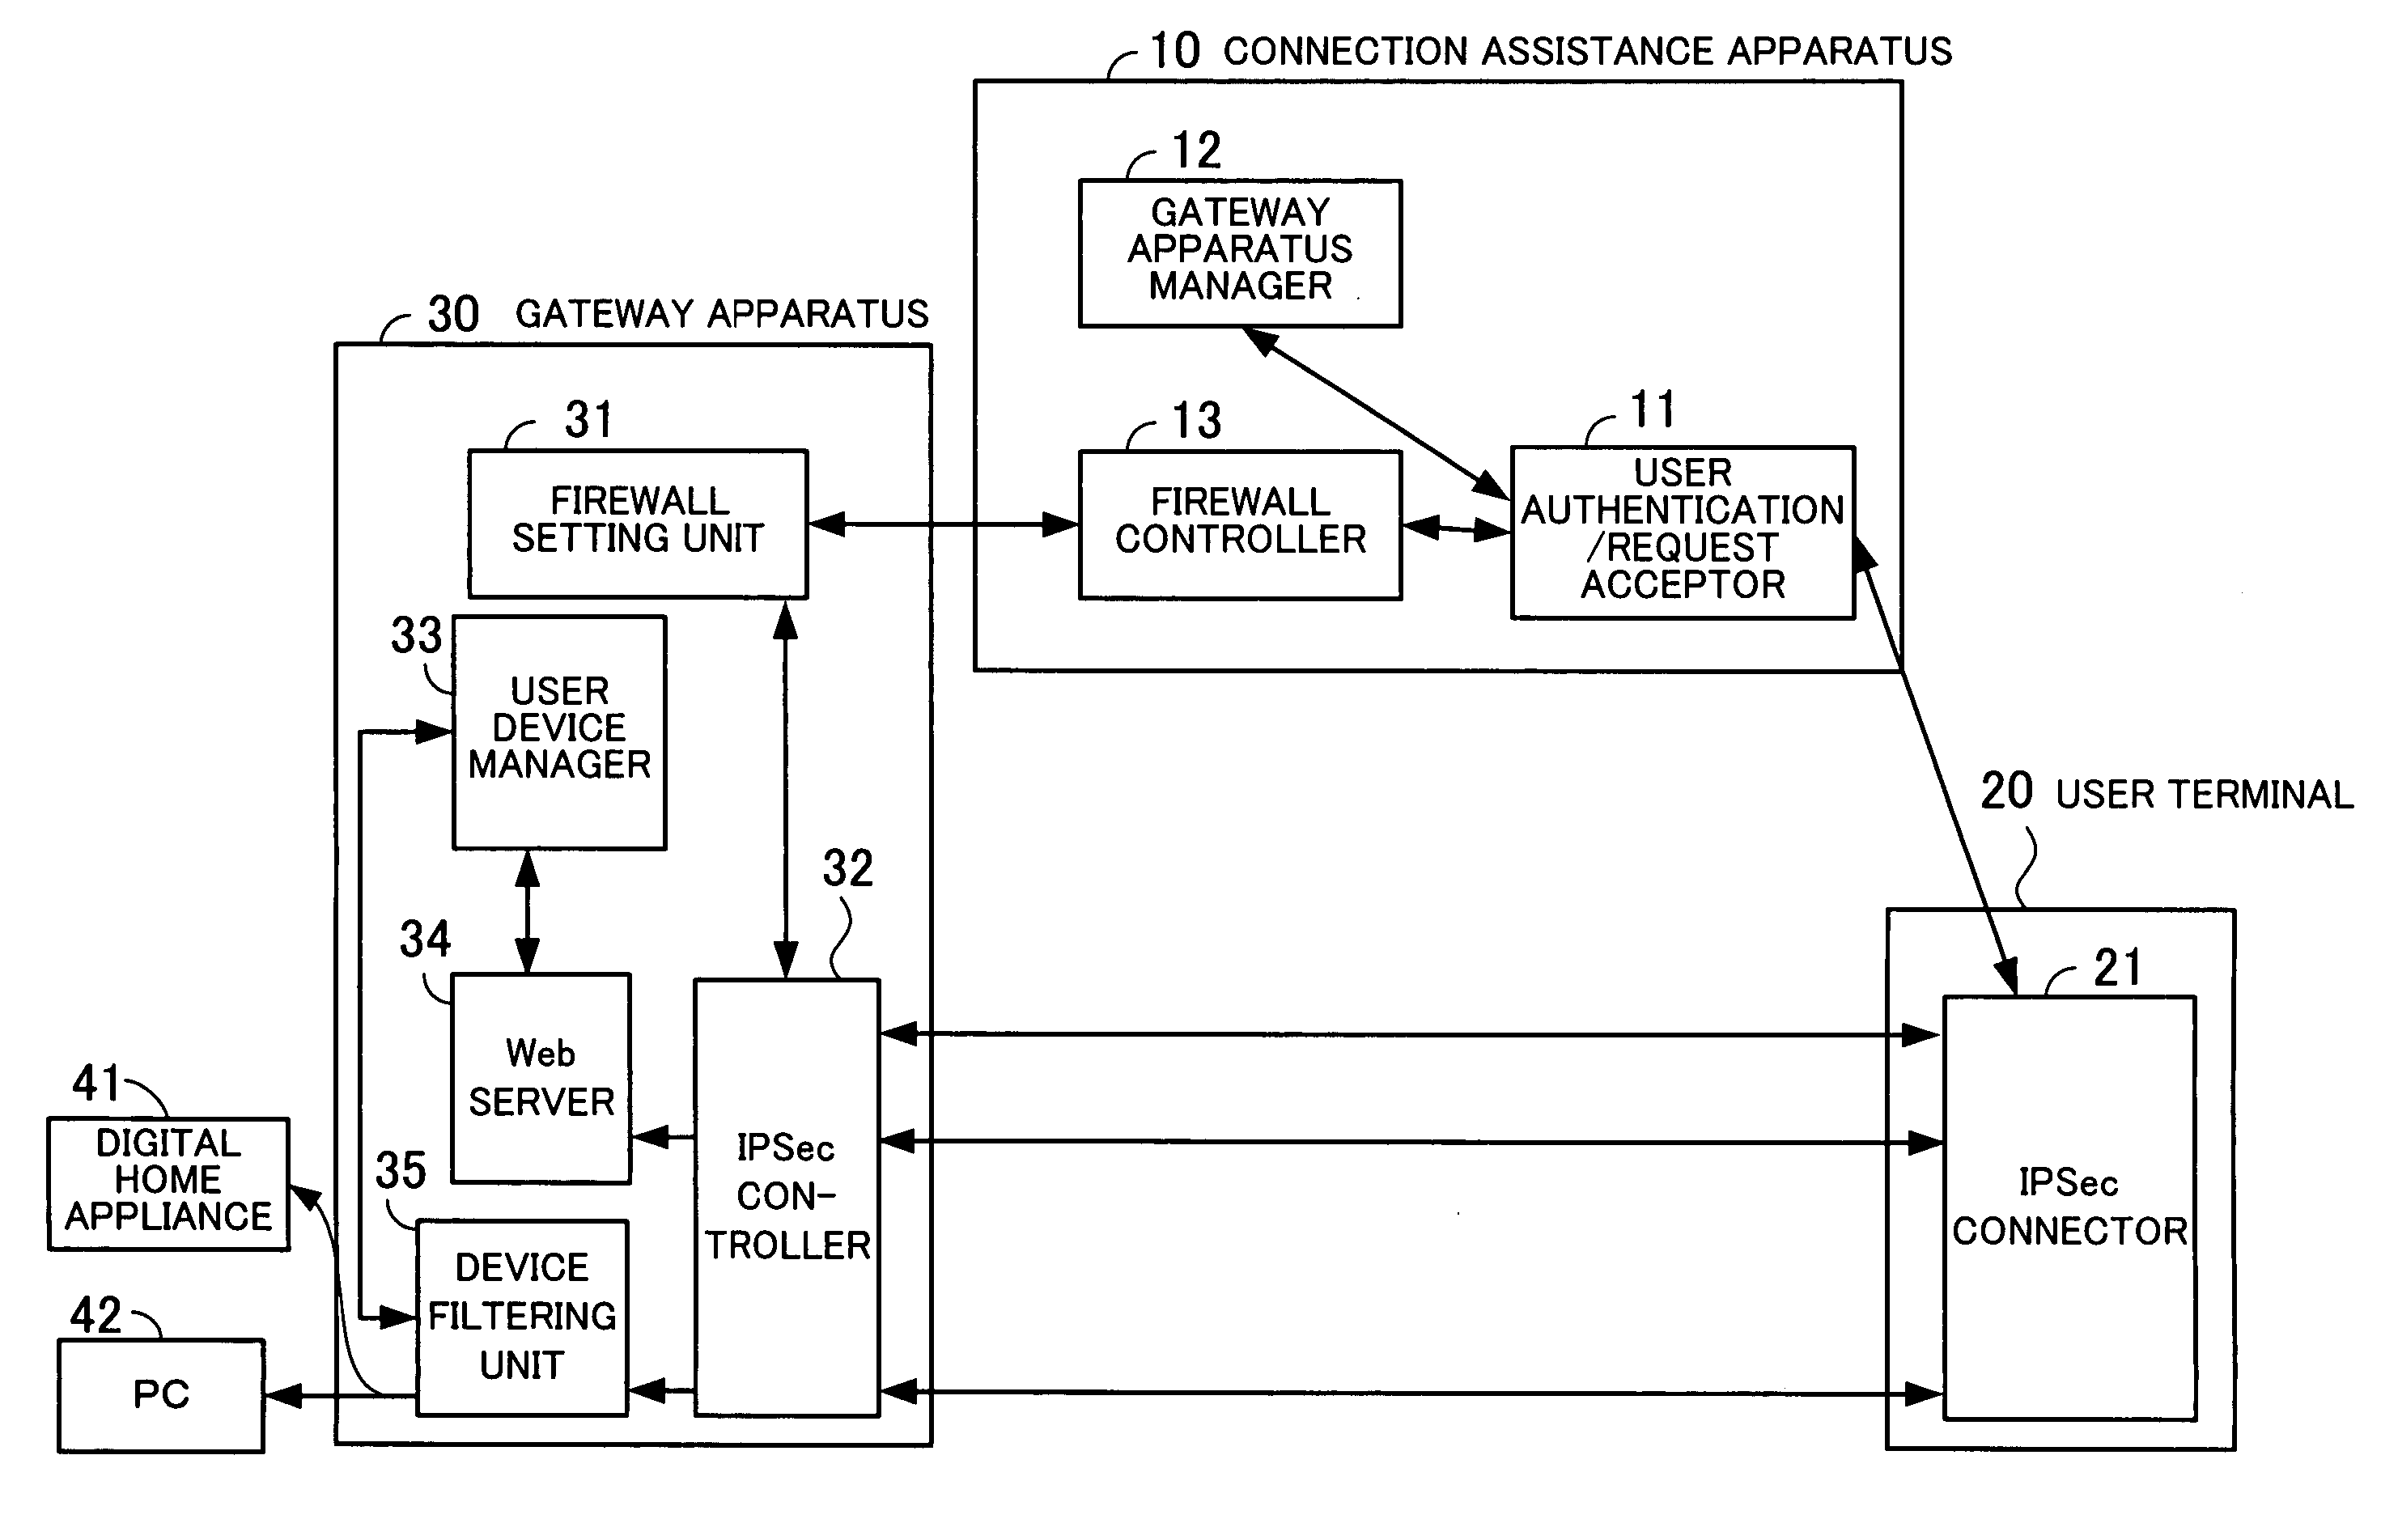 Connection assistance apparatus and gateway apparatus